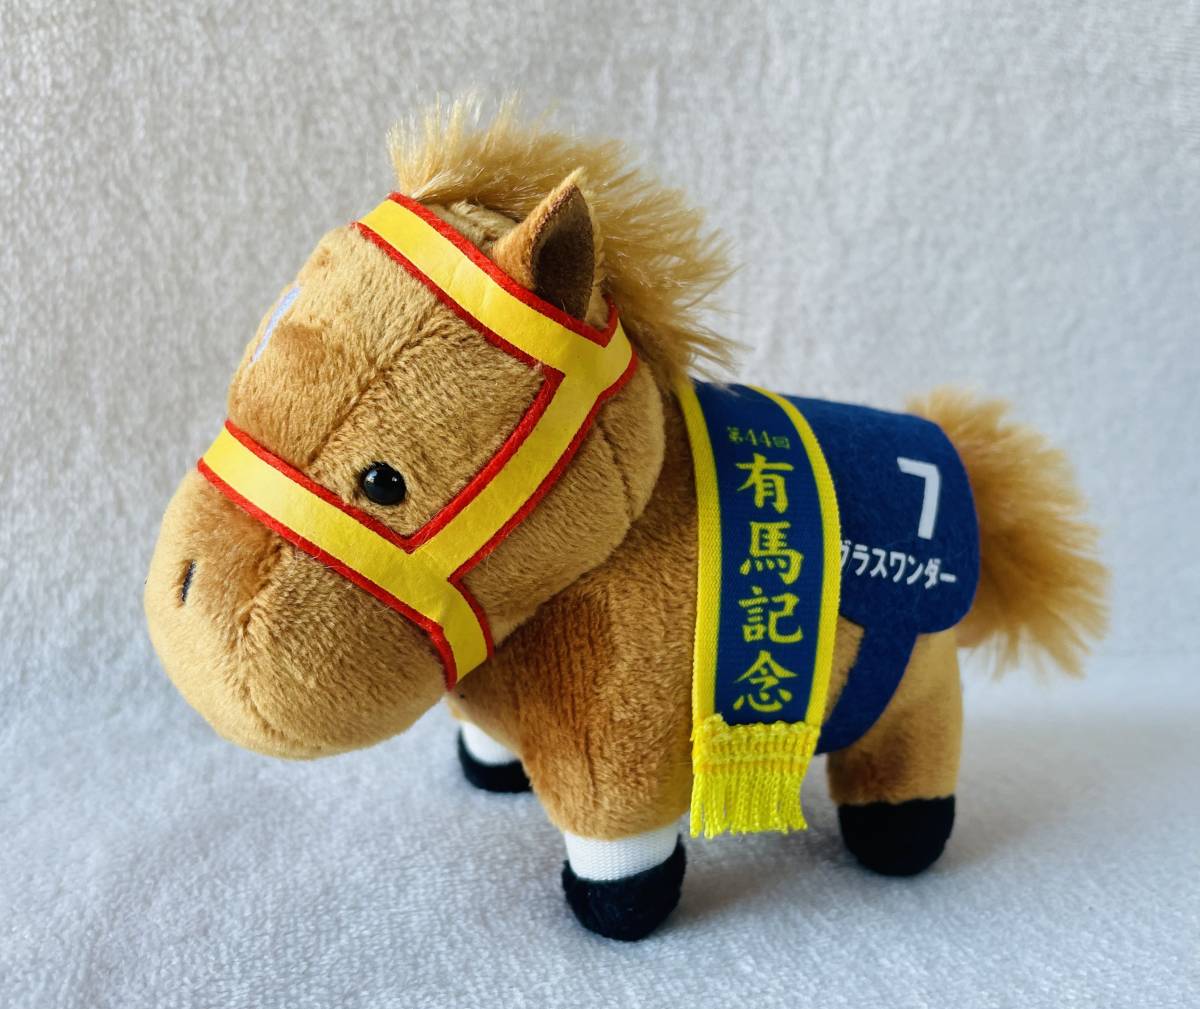 * Sara bread collection mascot ball chain 4 glass wonder * horse racing soft toy have horse memory 